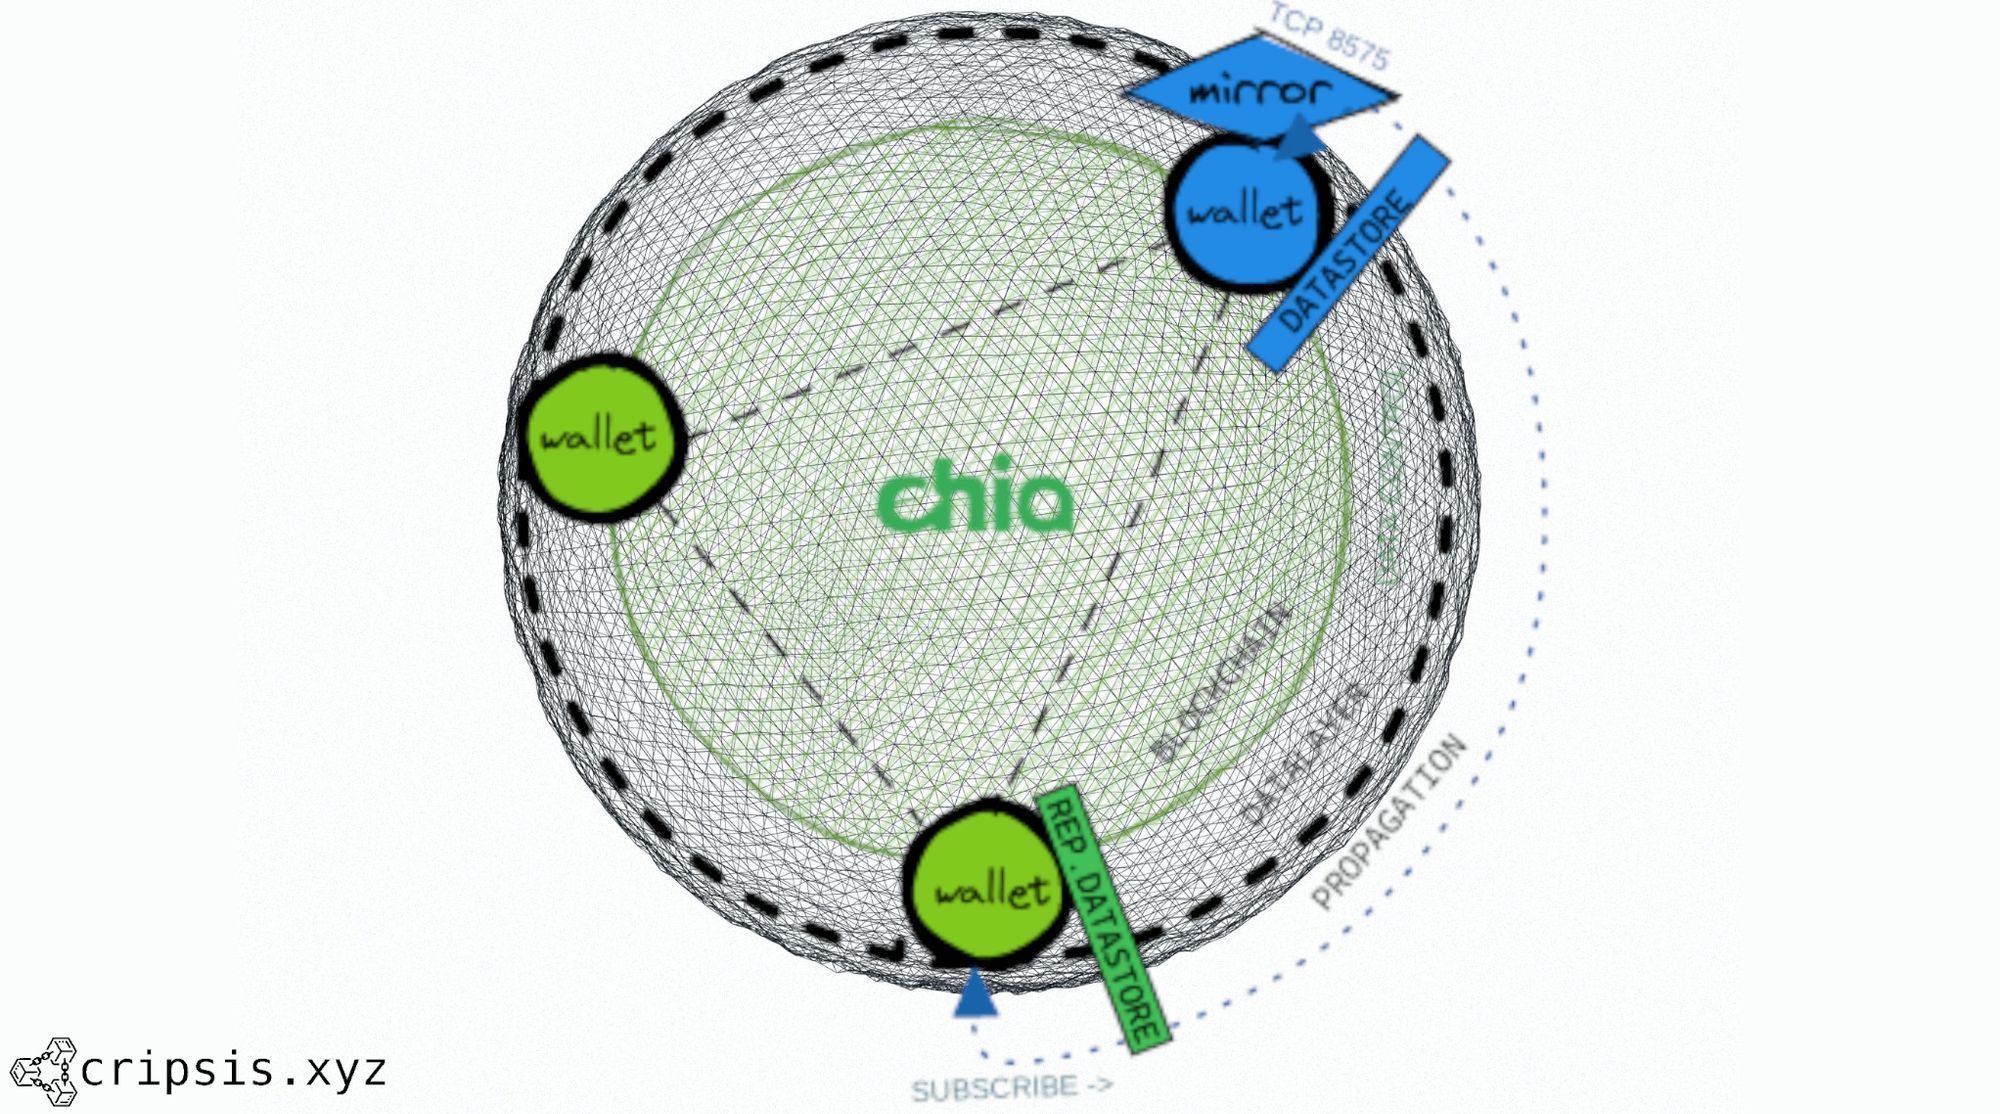 Chia 🌱 - DataLayer, the large general purpose decentralized database